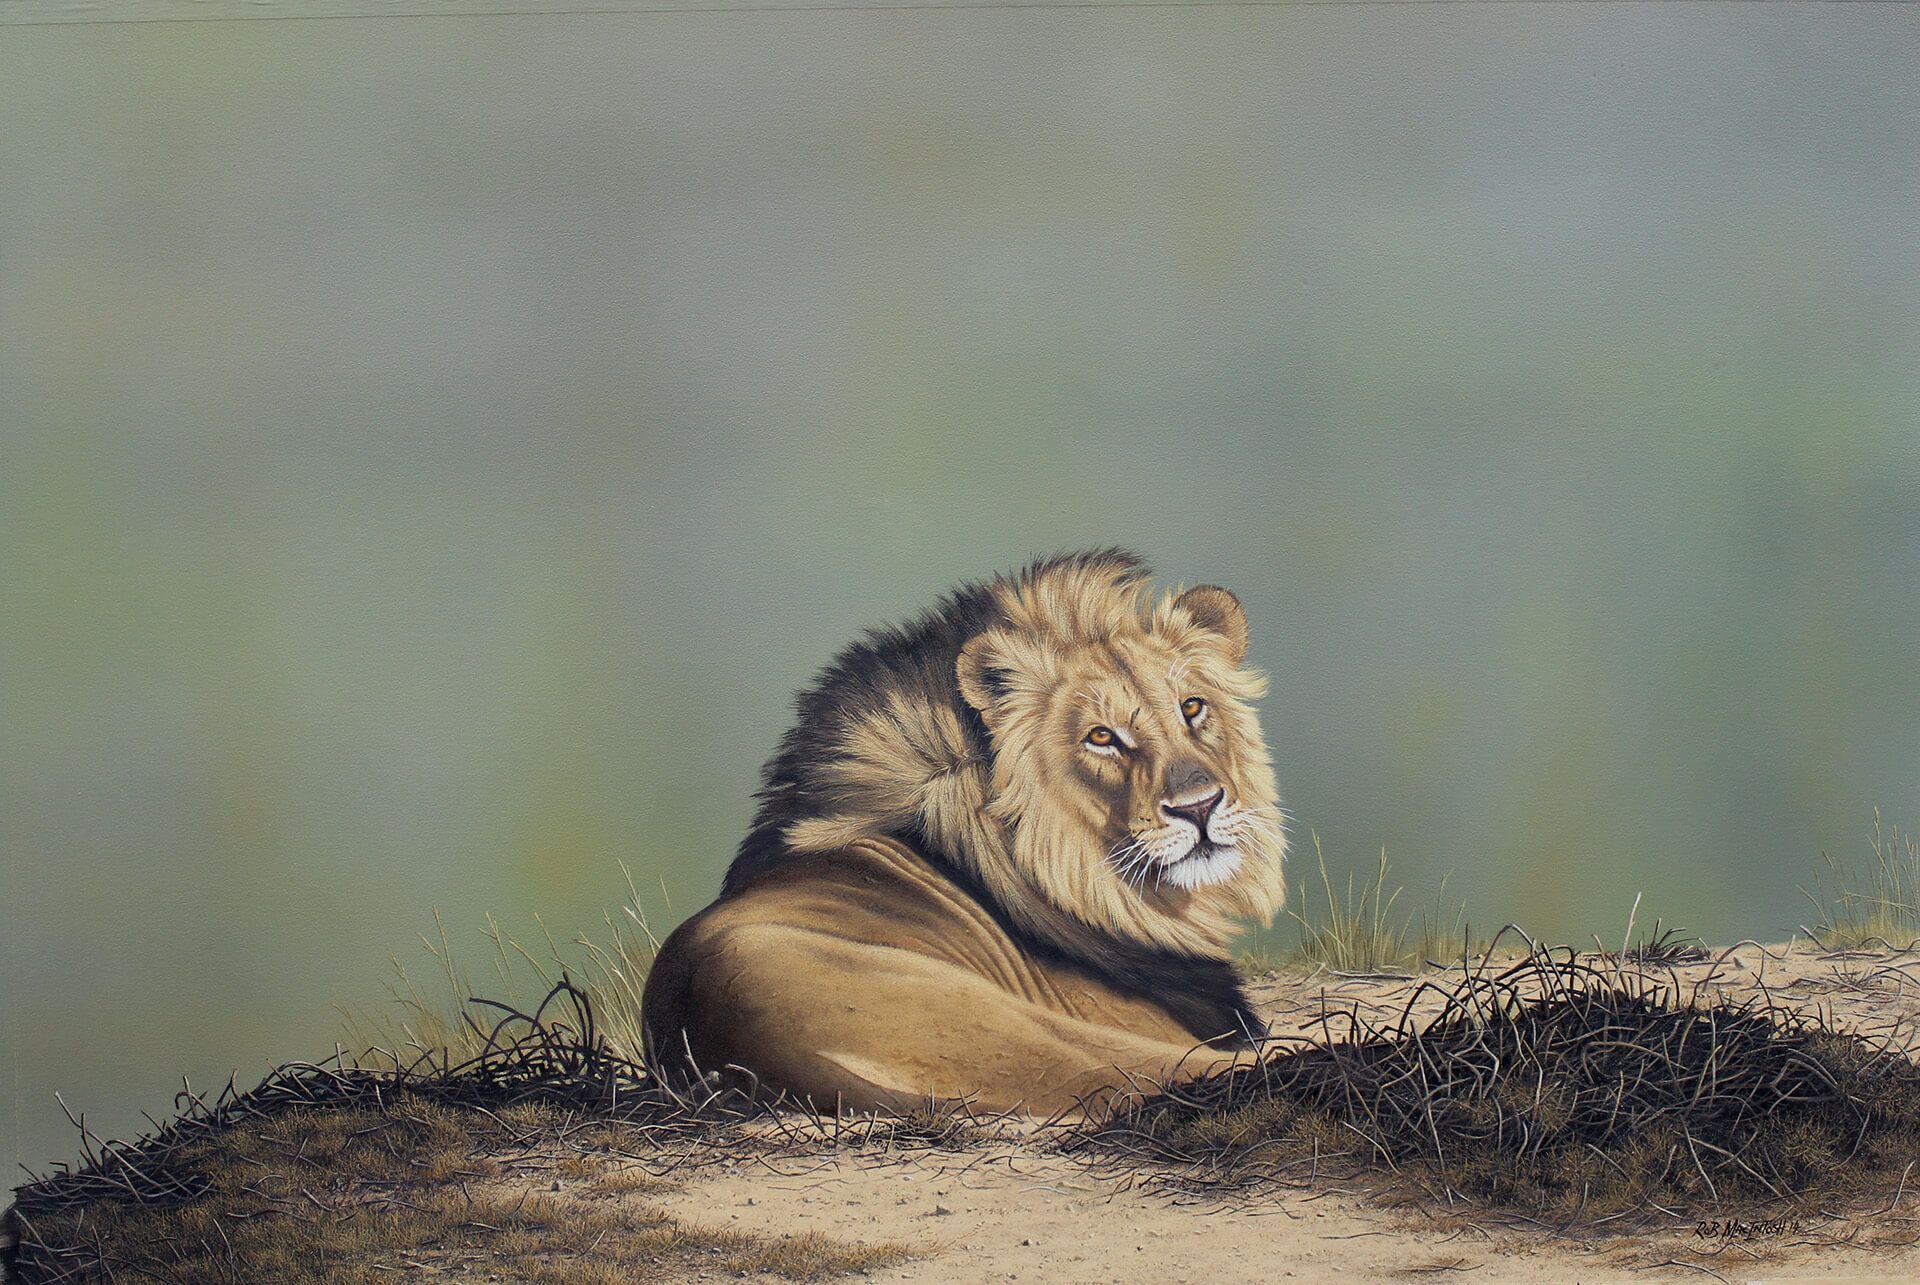 Photorealistic painting of a maned lion laying down